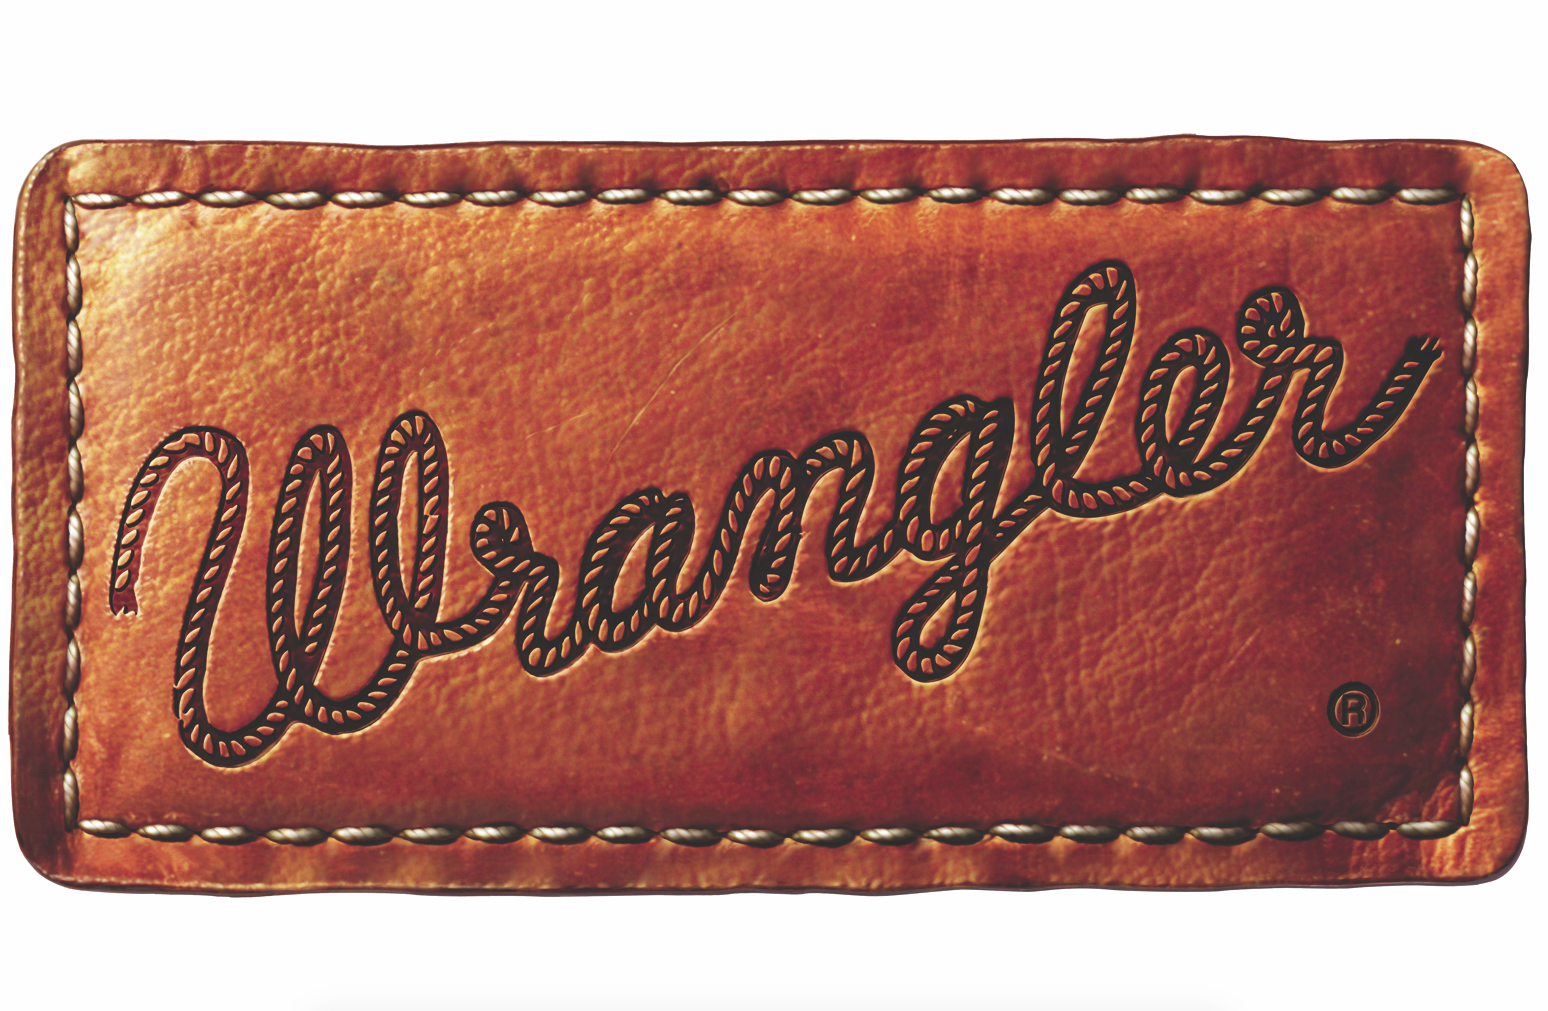 Normaal Mooie vrouw Airco WRCA Announces New Partnership with Wrangler - Working Ranch Cowboys  Association & Foundation